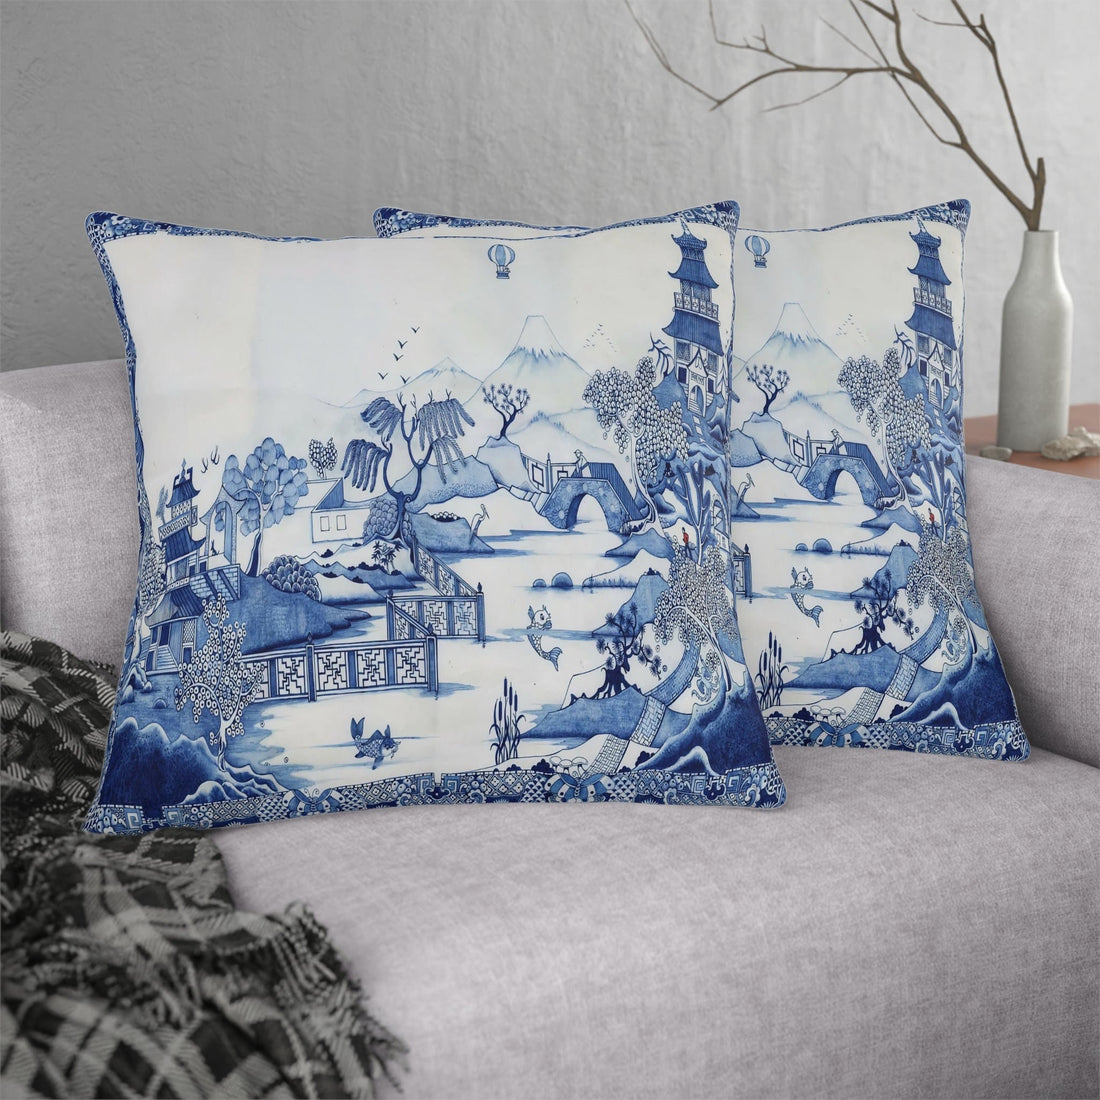 Kate McEnroe New York Chinoiserie Blue Willow Indoor Outdoor PillowThrow Pillows17687676806849716790